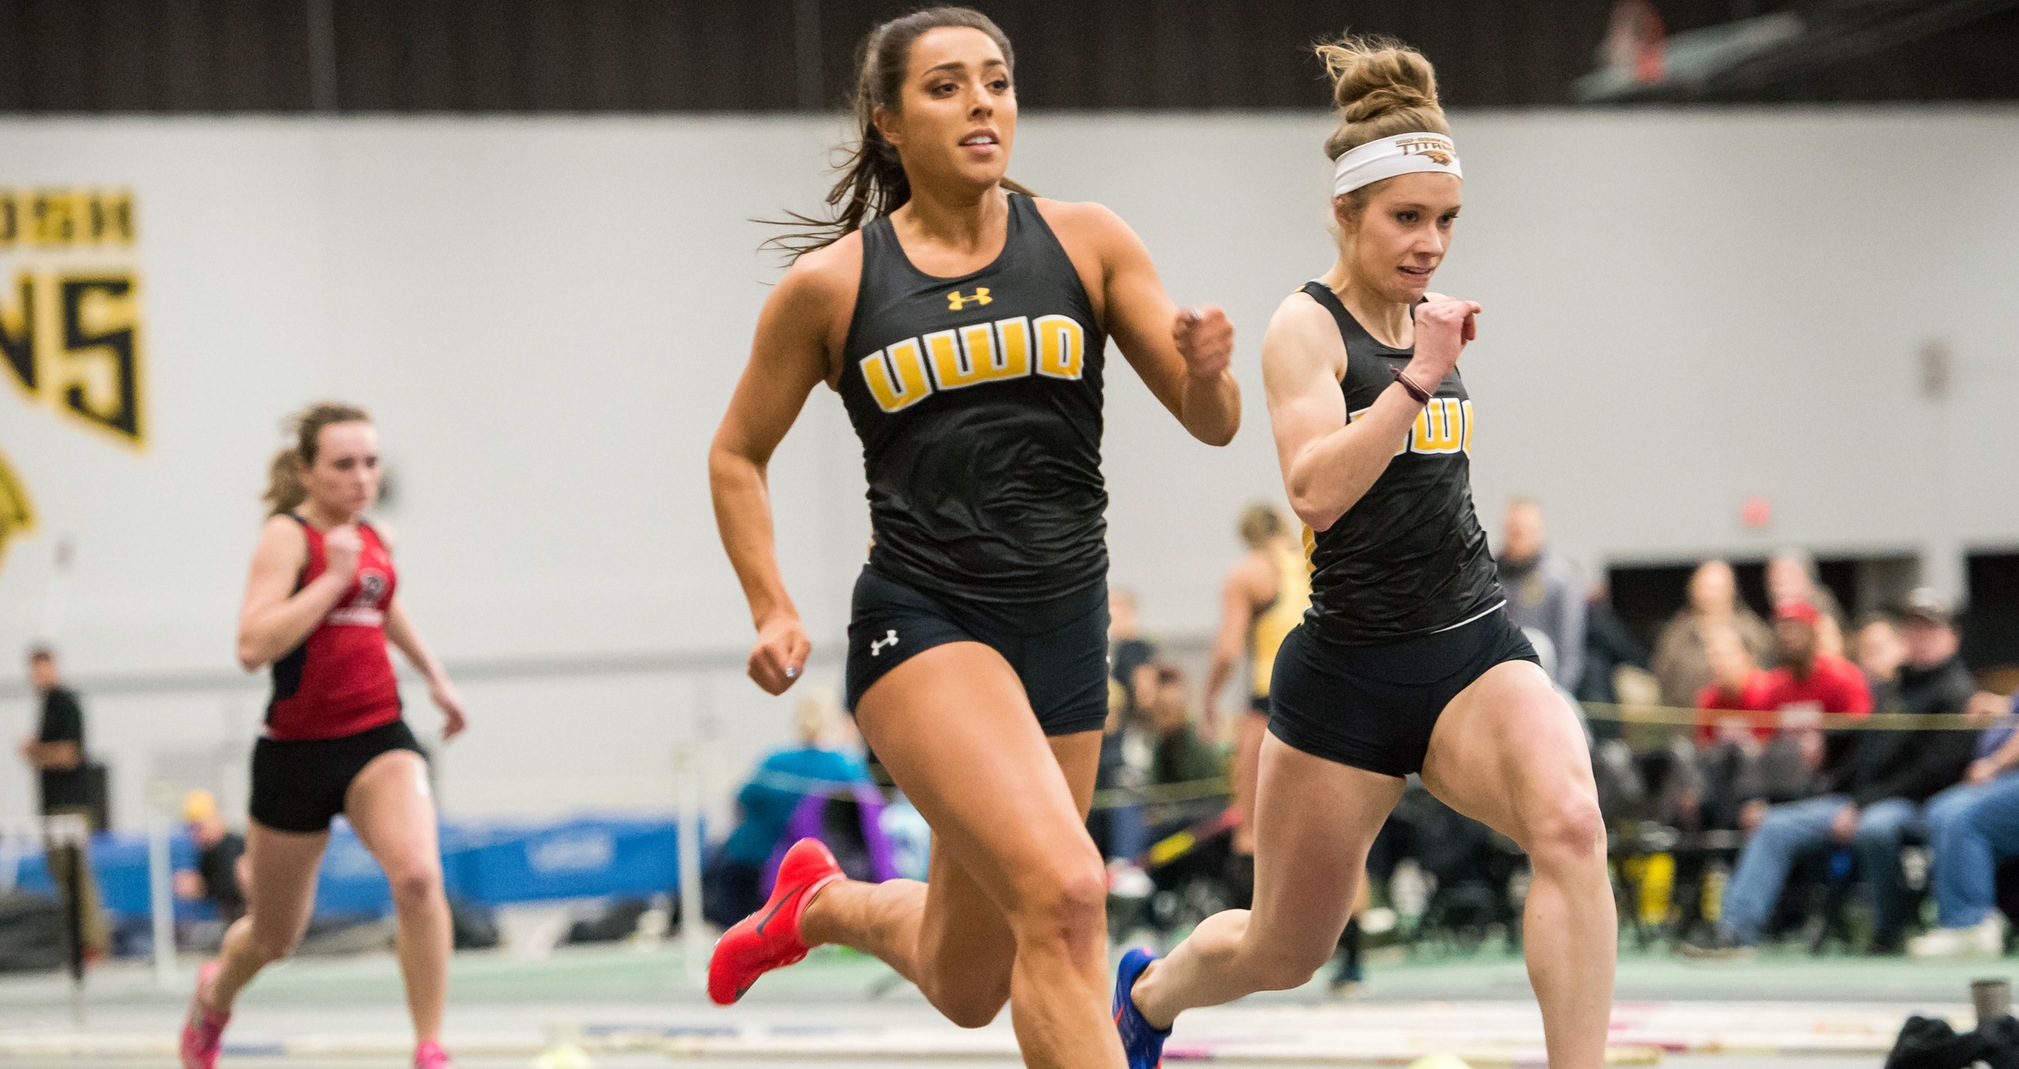 Emily Reichenberger (left) ranks fourth in the 200-meter dash and 12th in the 60-meter dash on this season's national performance list.